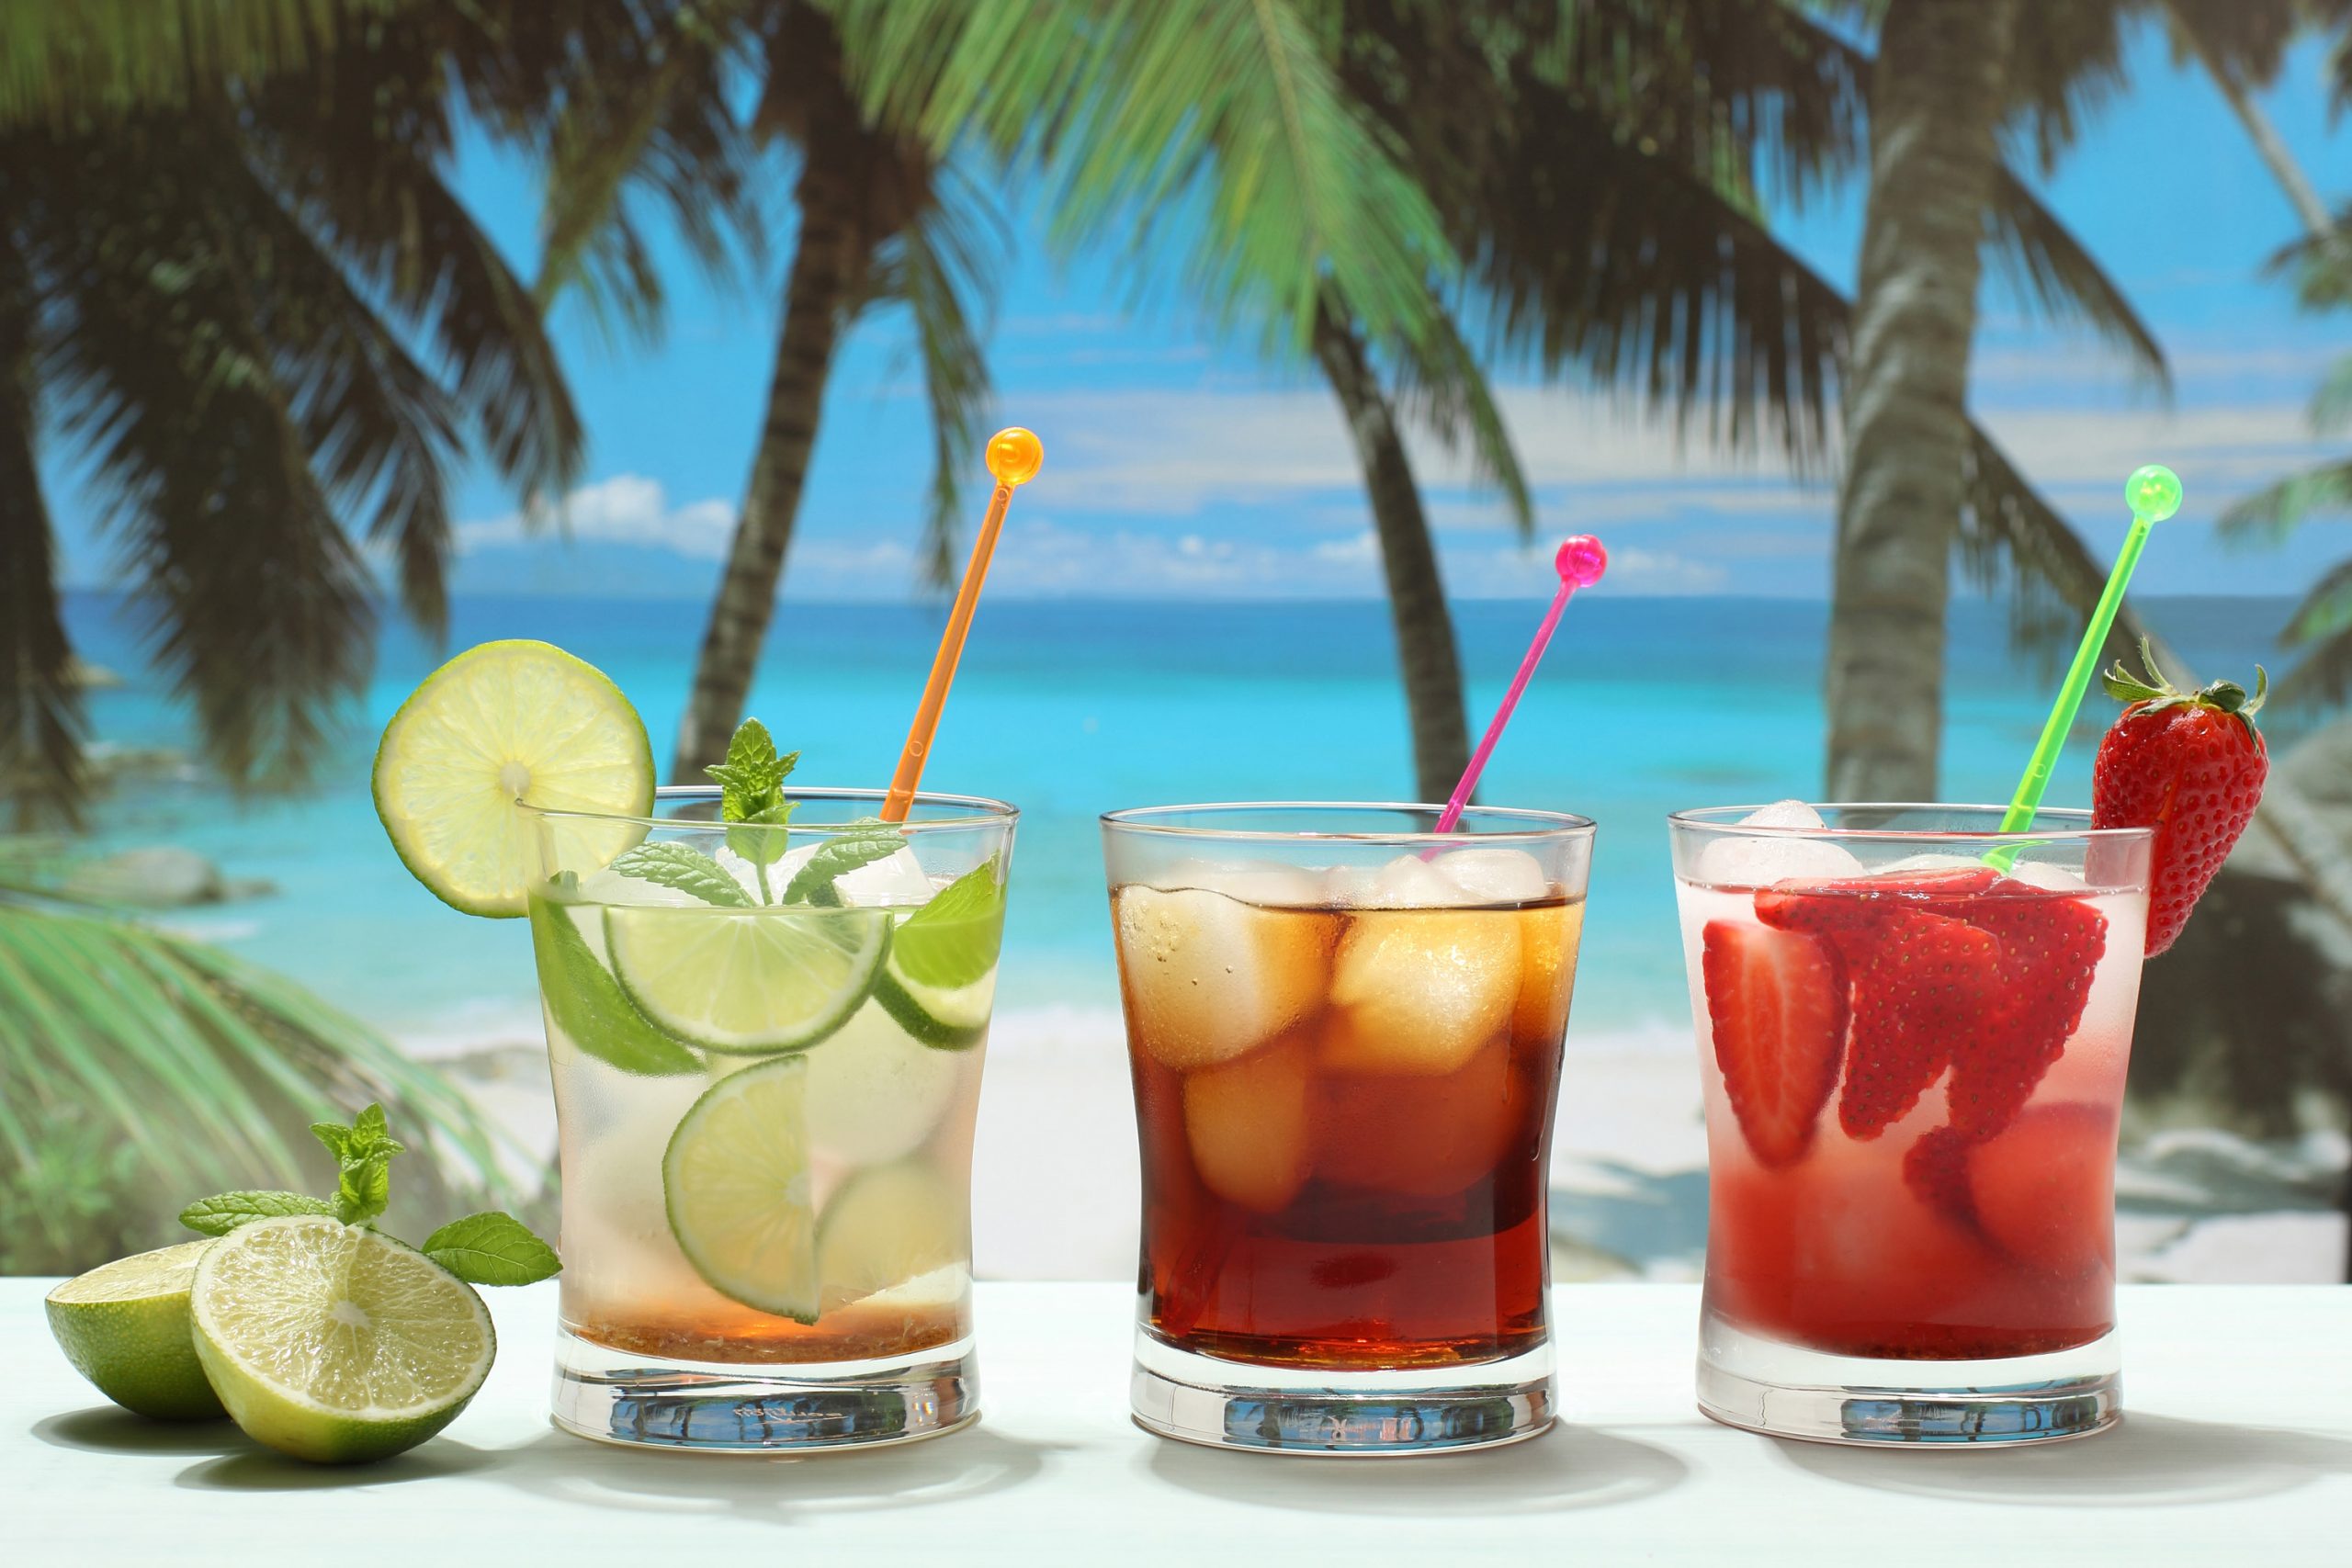 Celebrate National Rum Day With Some Amazing Caribbean Cocktails!